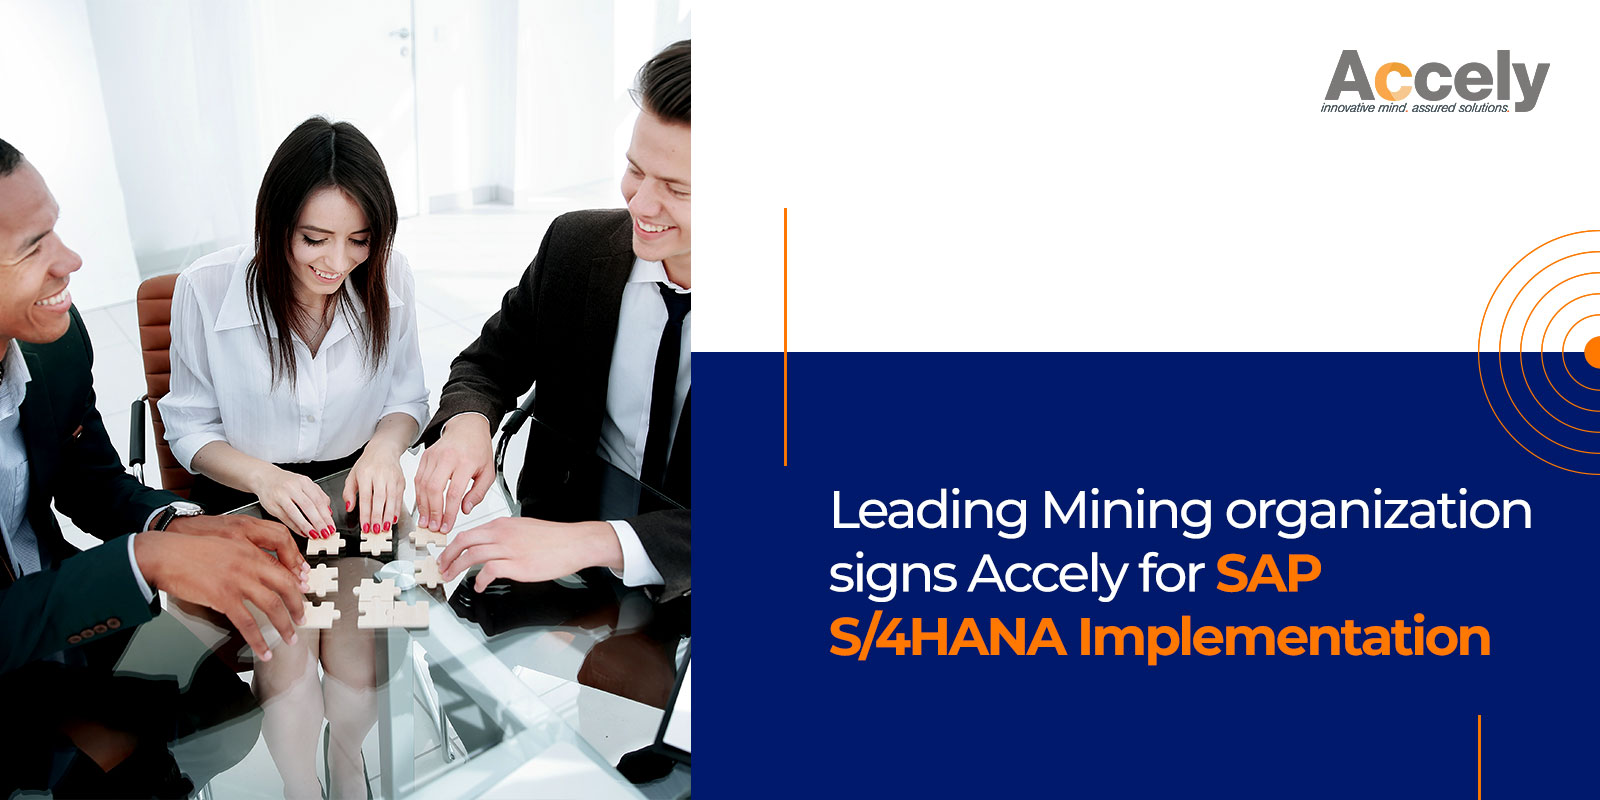  Mining Company from DRC signs Accely for SAP S/4HANA Implementation